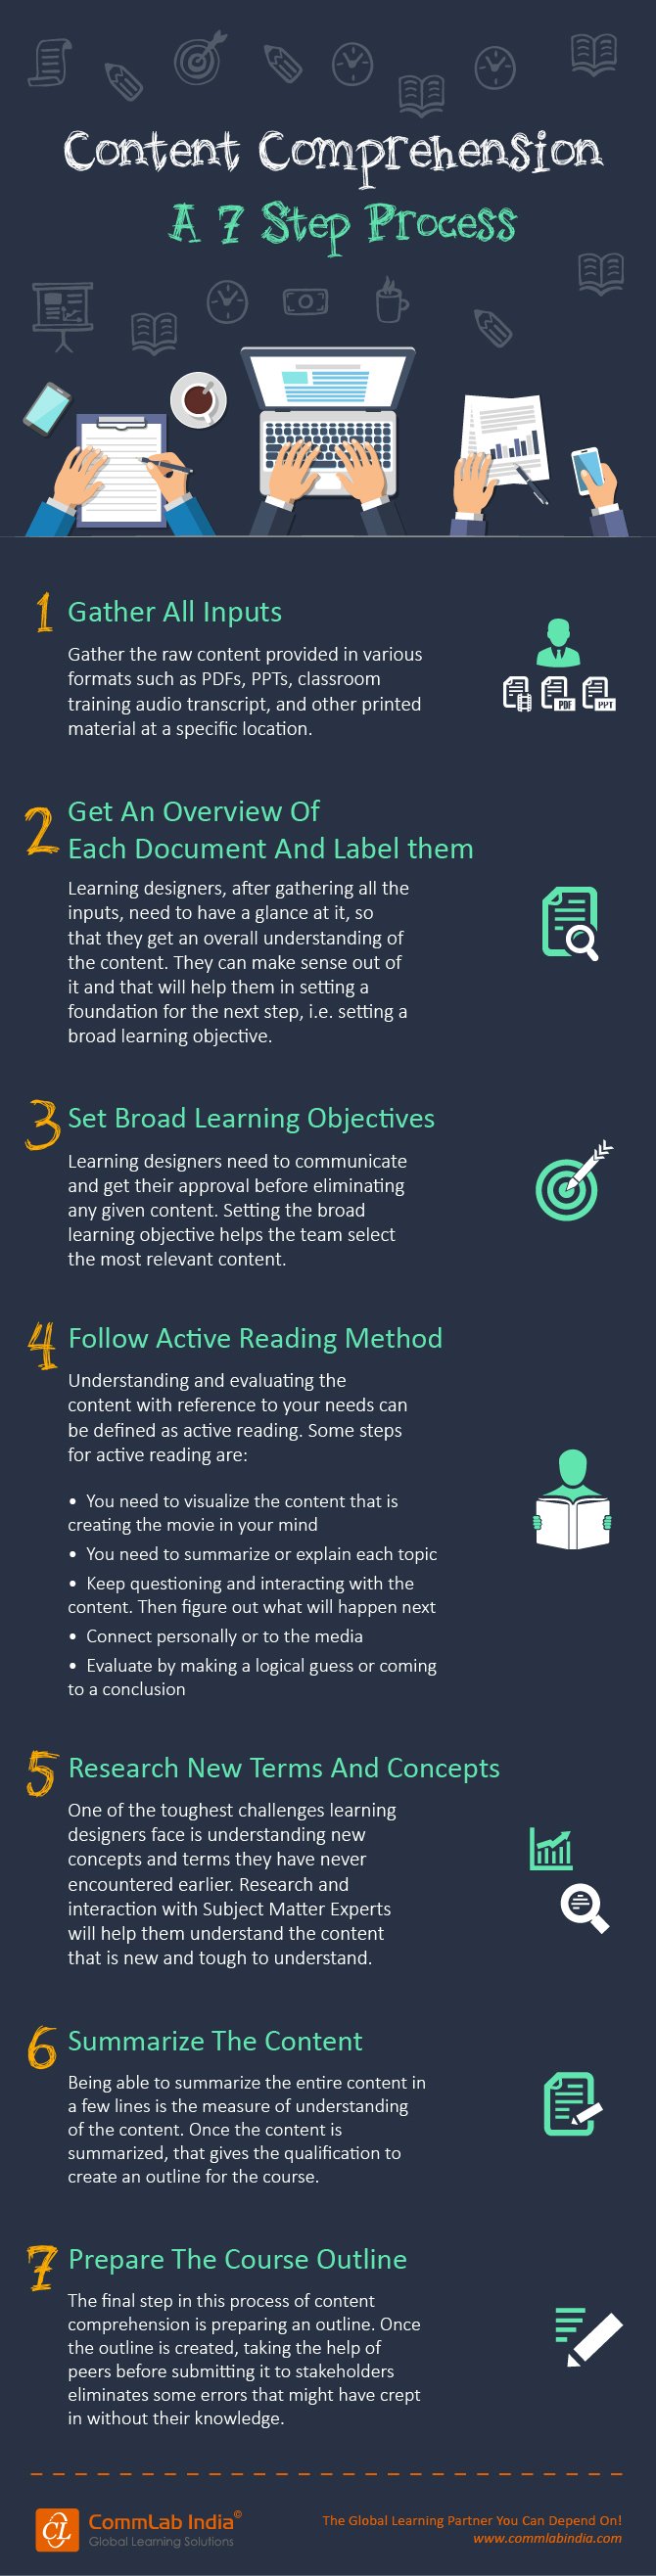 7 Step Process of Content Comprehension in E-learning [Infographic]